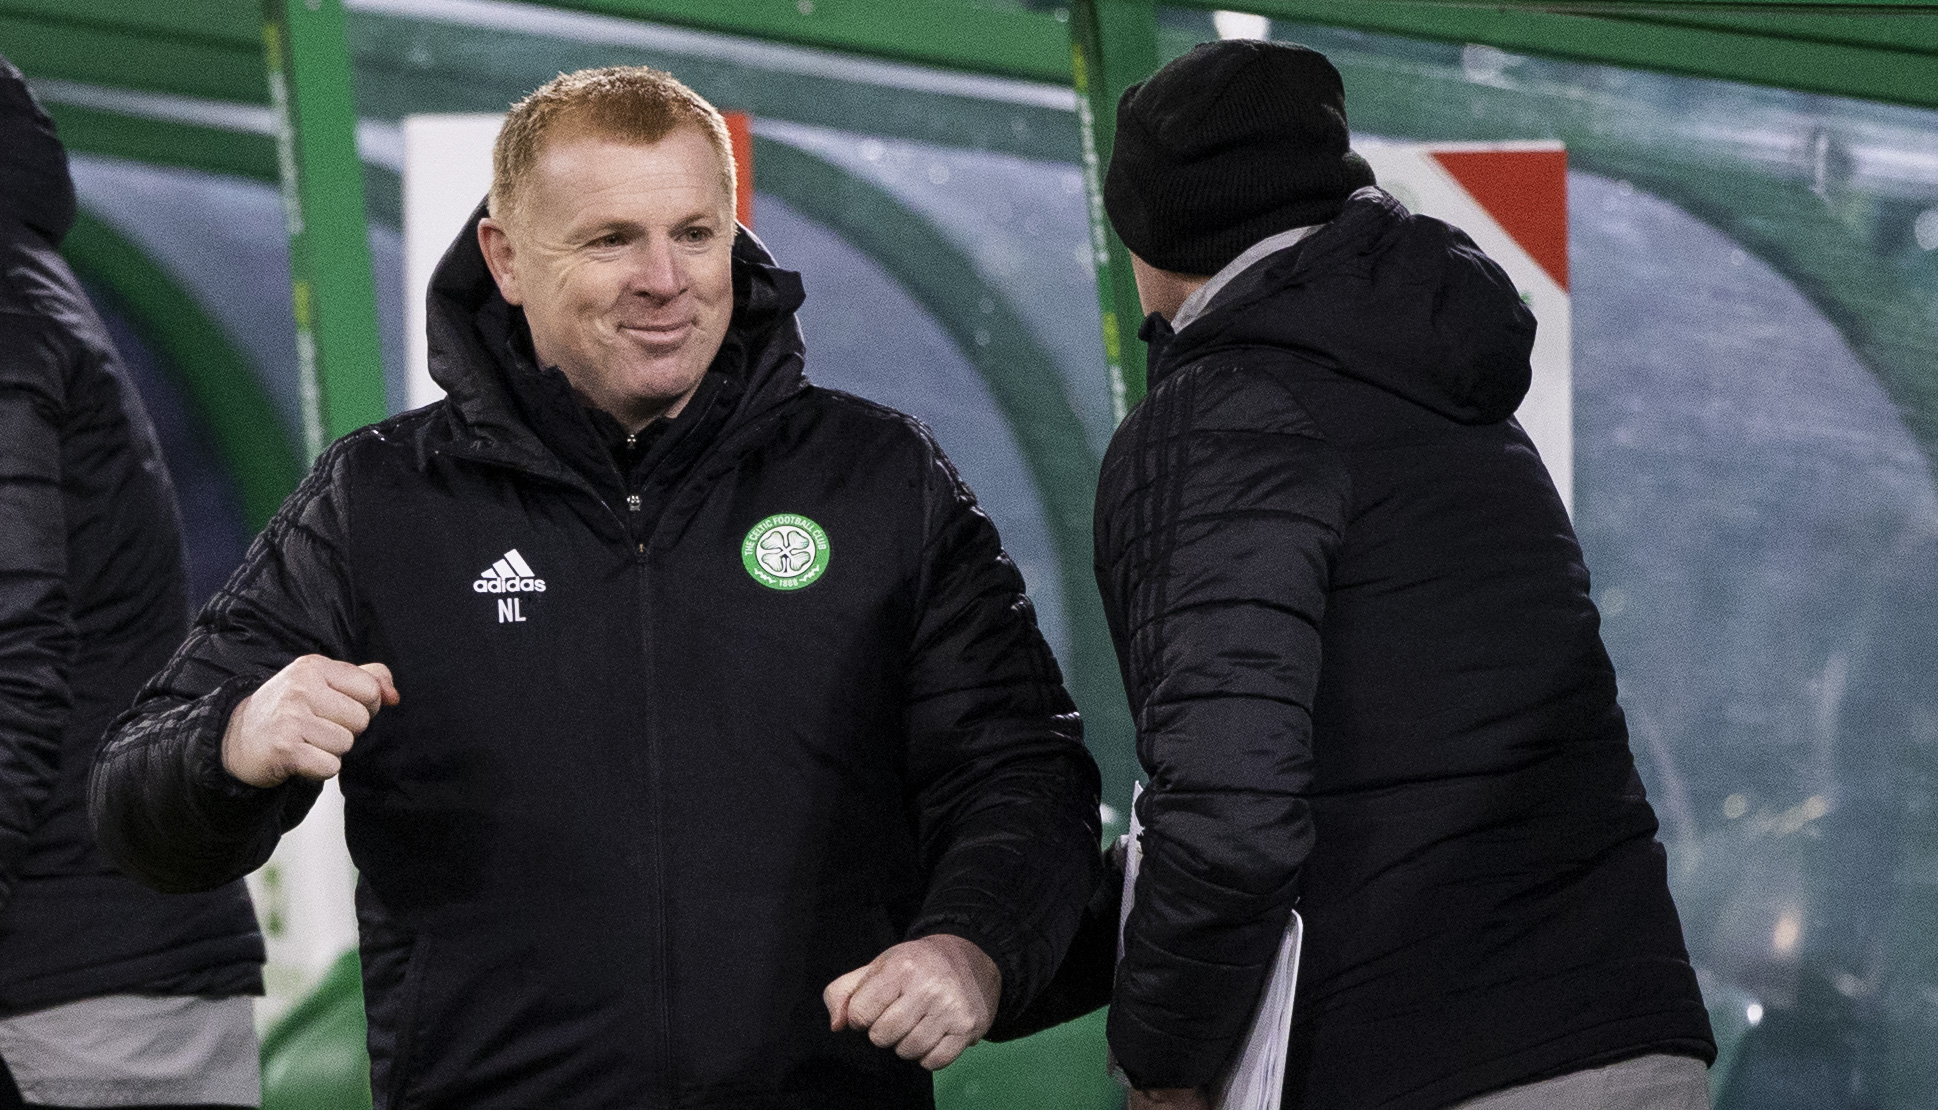 Neil Lennon fails to take key opportunity to apologise for Celtic's poor campaign